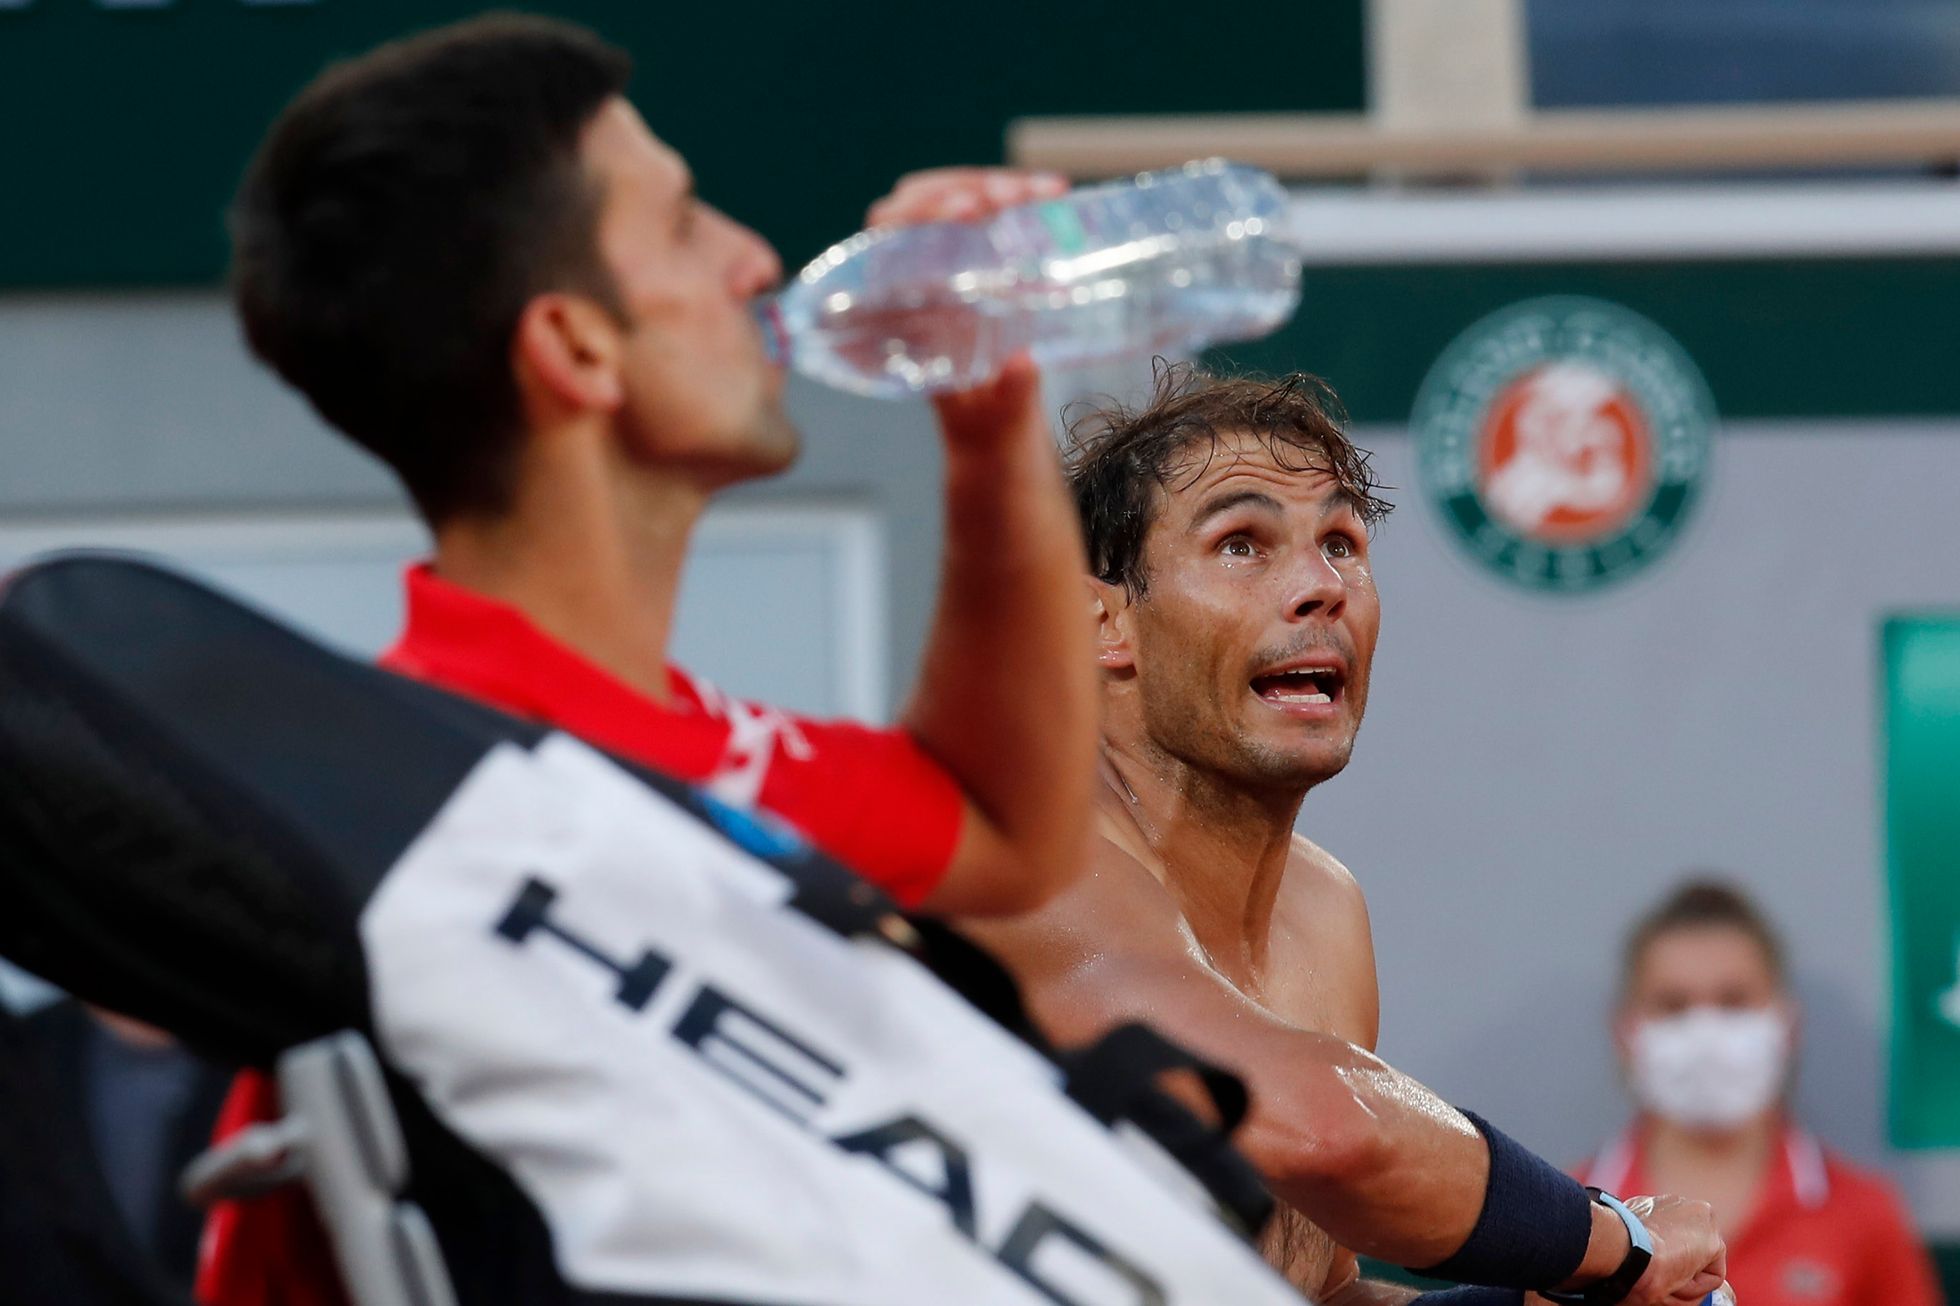 The most important duel of the decade.  Nadal loses backstage battle in Paris, business wins